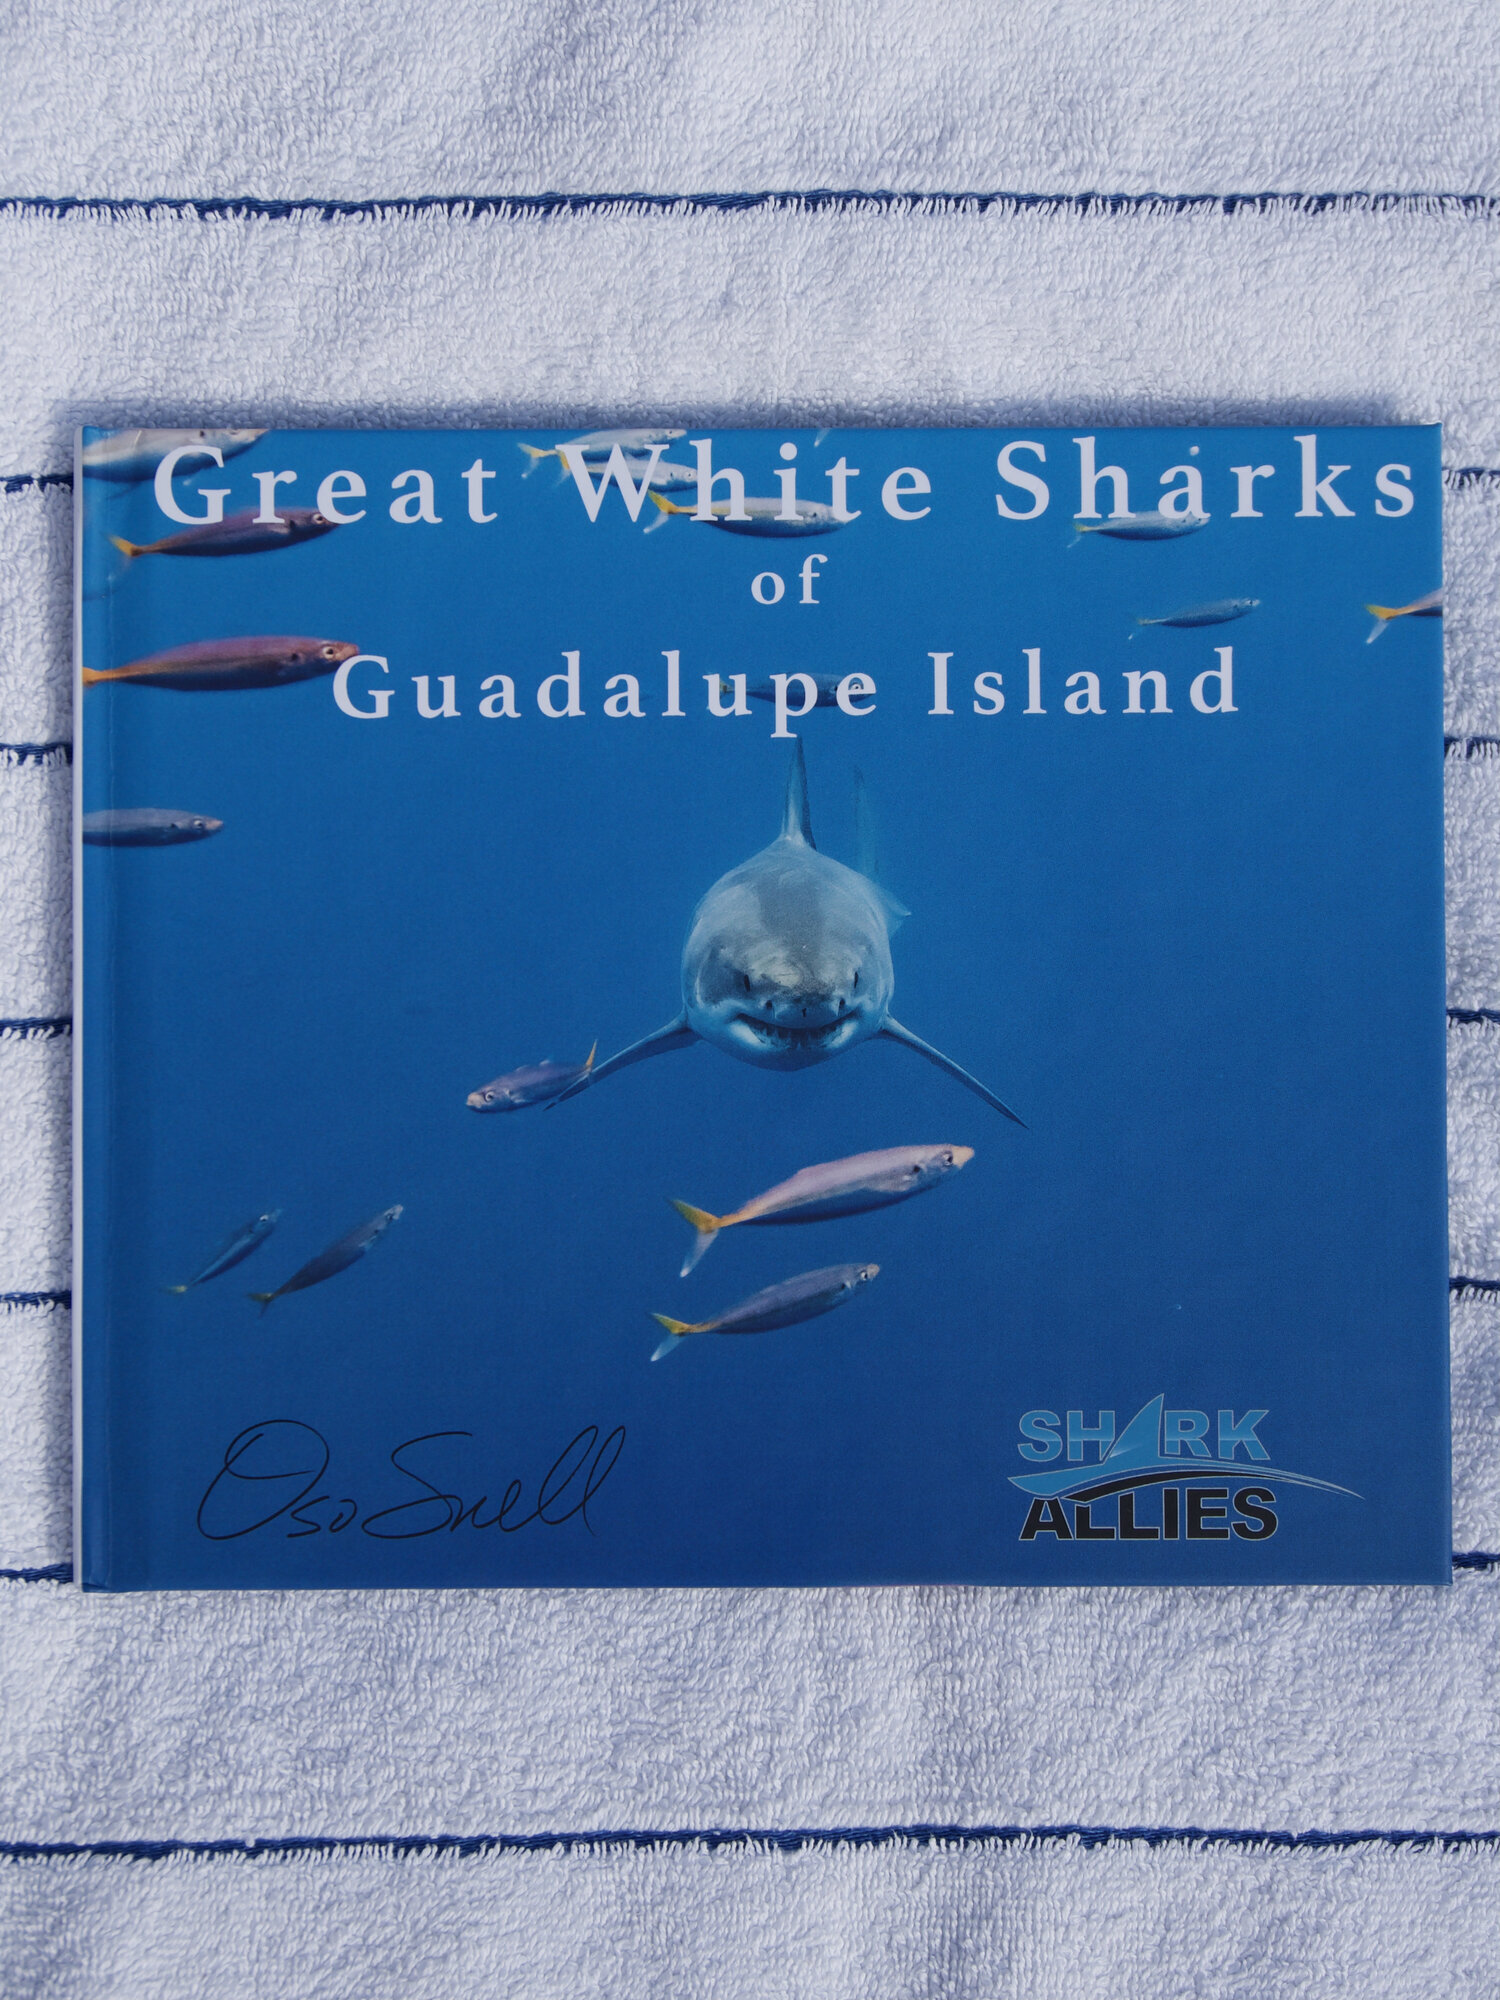 Great White Sharks of Guadalupe Island by Peter Snell